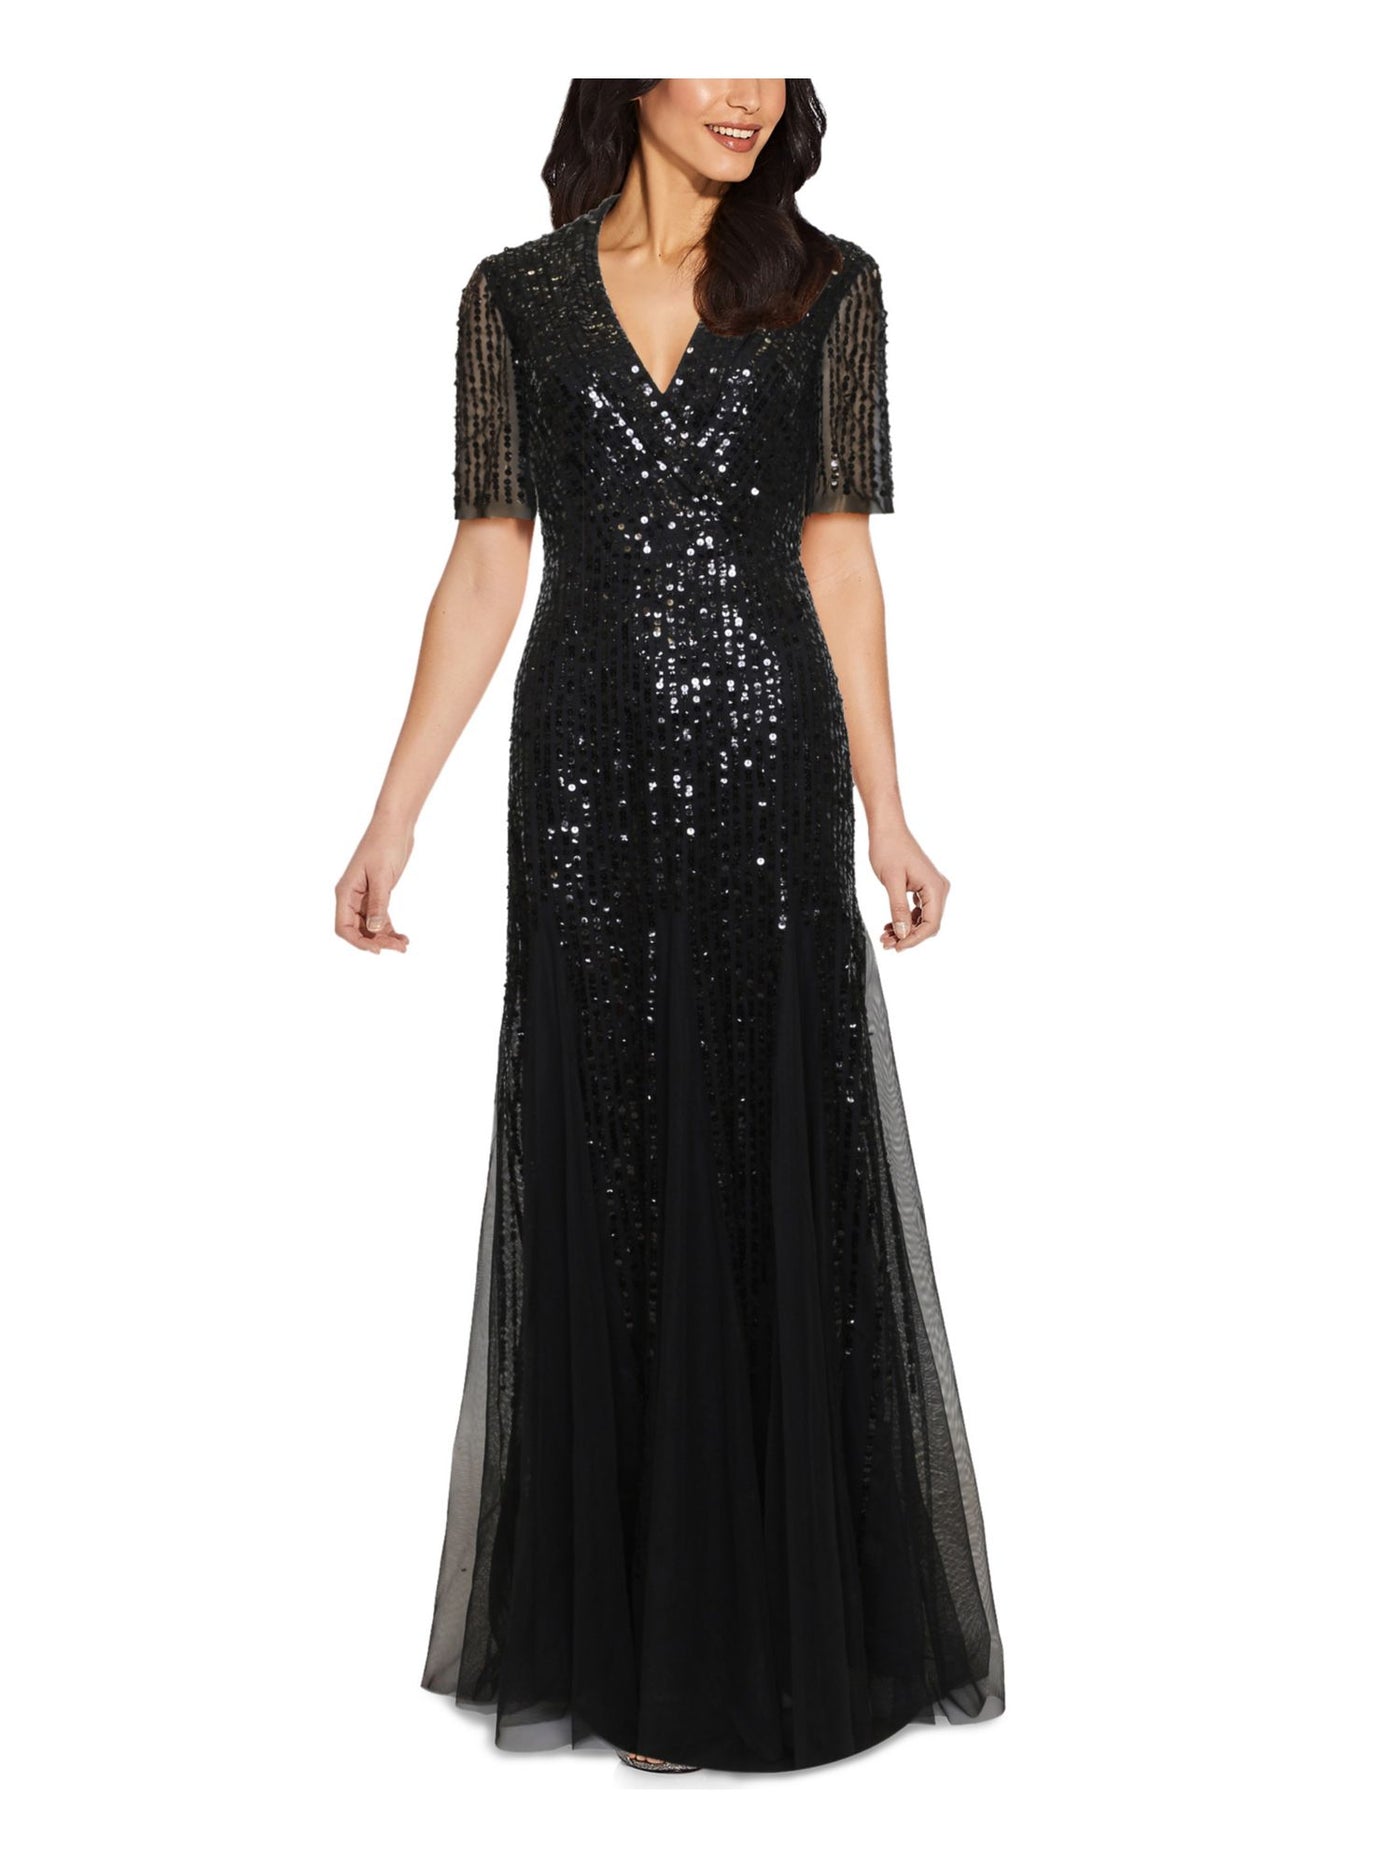 ADRIANNA PAPELL Womens Black Sequined Fitted Tuxedo Style Illusion Godets Short Sleeve V Neck Full-Length Formal Gown Dress 0